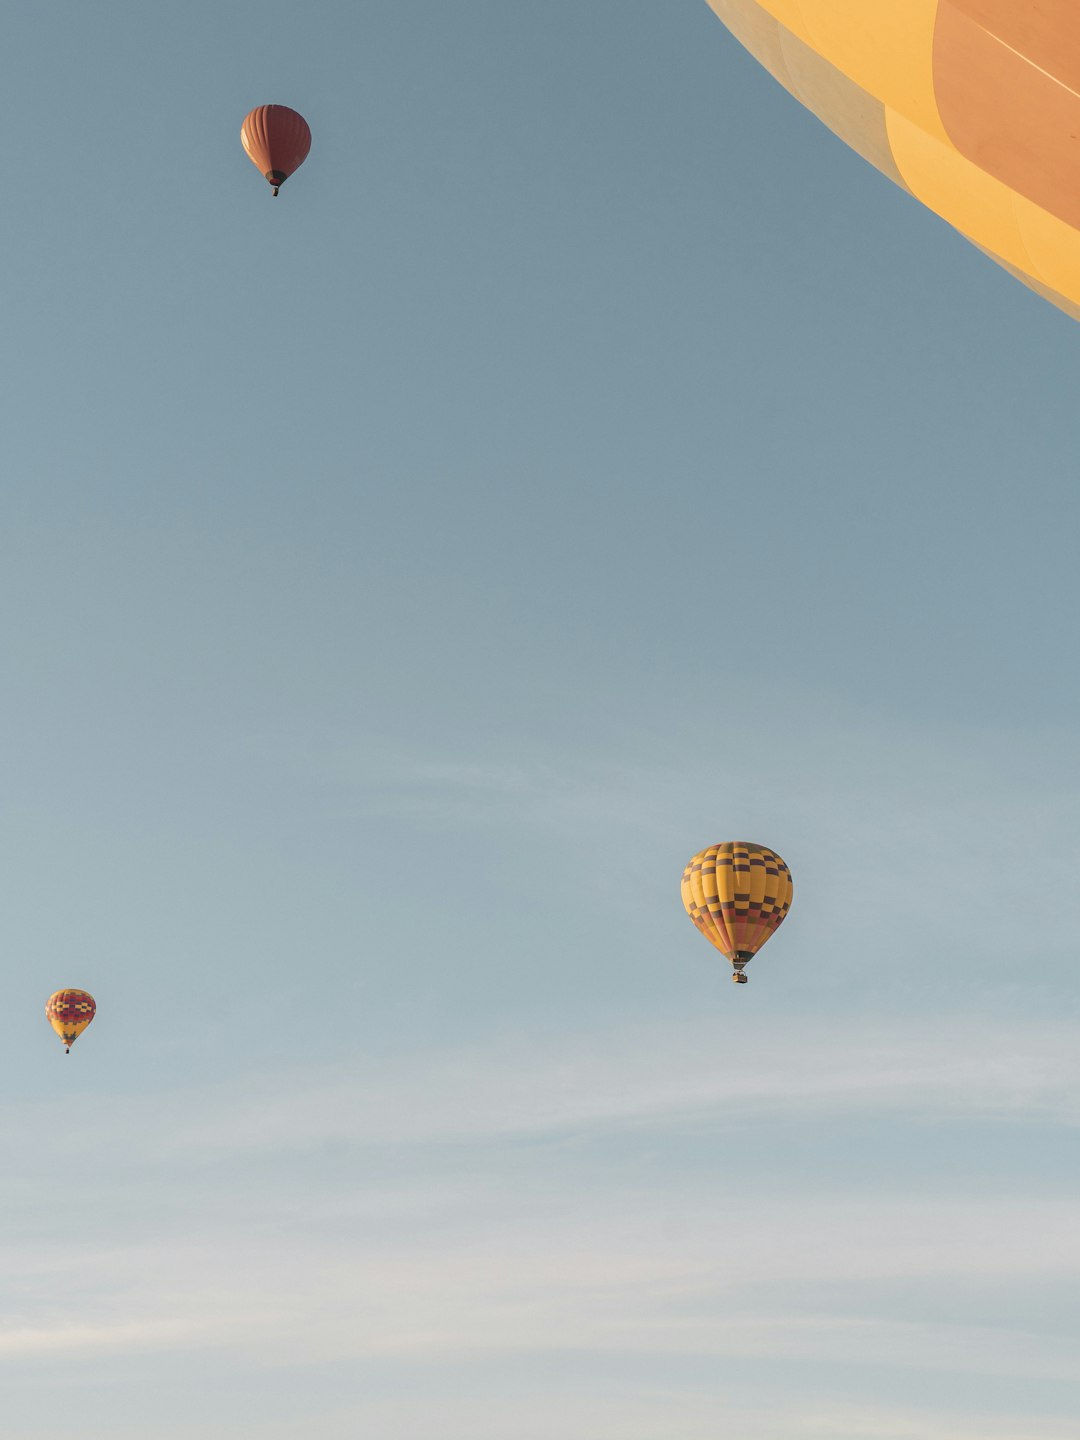 red and yellow hot air balloon in mid air under blue sky during daytime